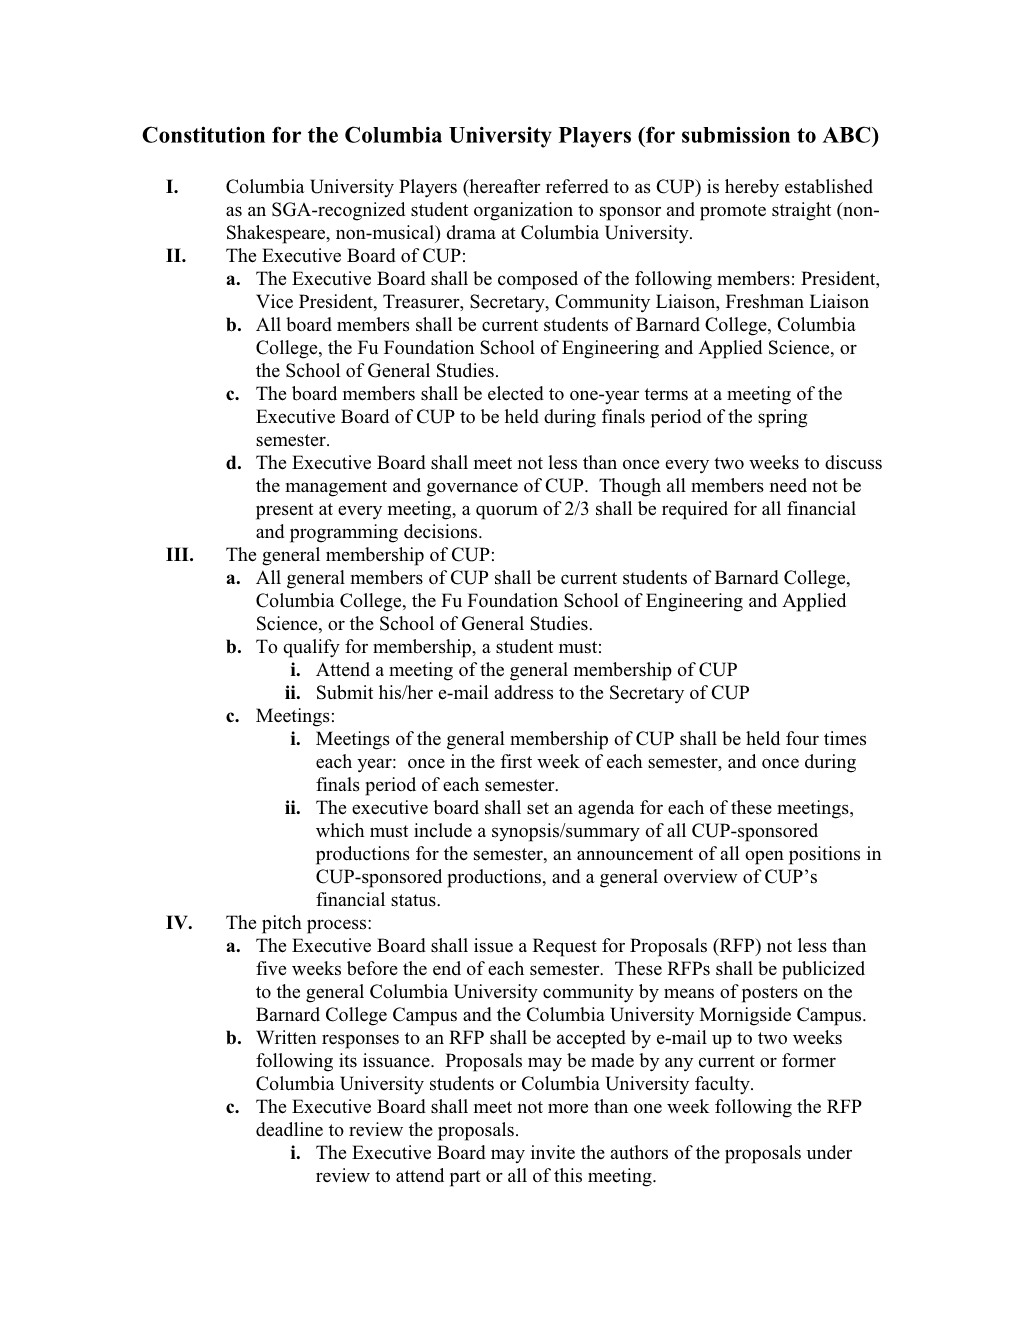 Constitution for the Columbia University Players (DRAFT)